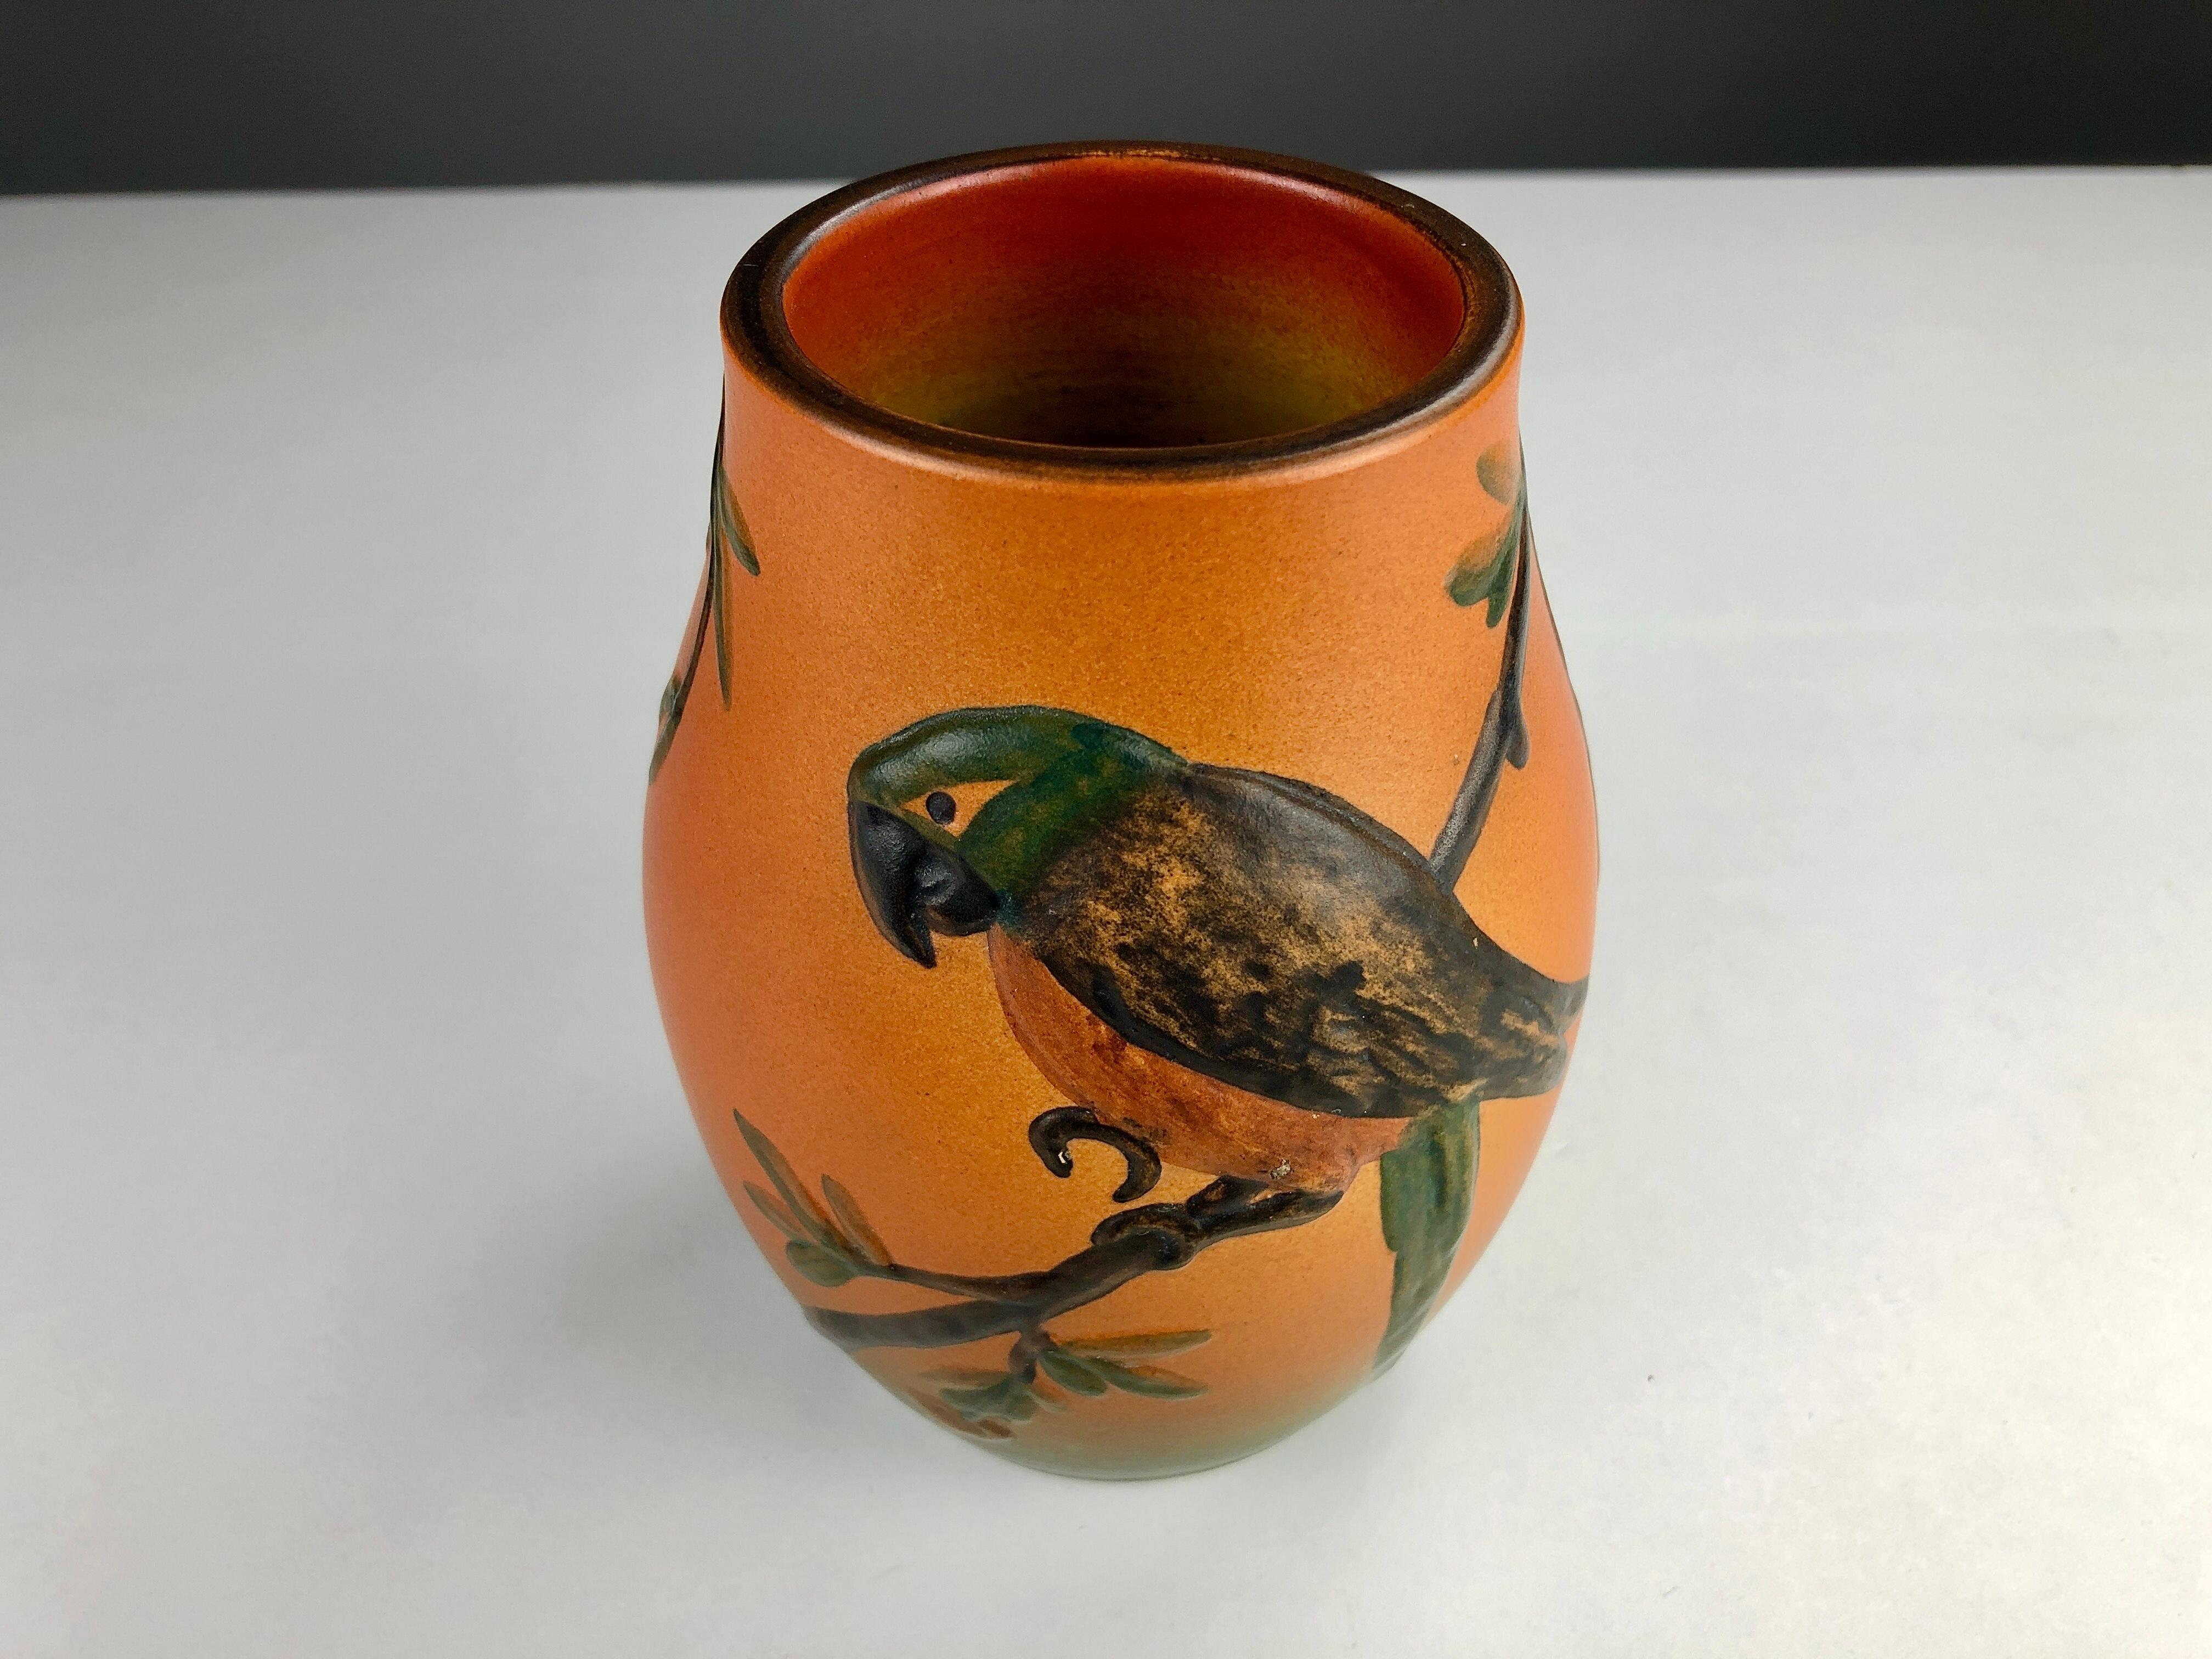 Hand-crafted Danish Art Nouveau parrot decorated vase by West in 1927 for P. Ipsens Enke

The art nouveau vase feature very well made lively parrot with branches and leafs is in very good condition.

P. Ipsens Enke (1843 - 1955) was a very